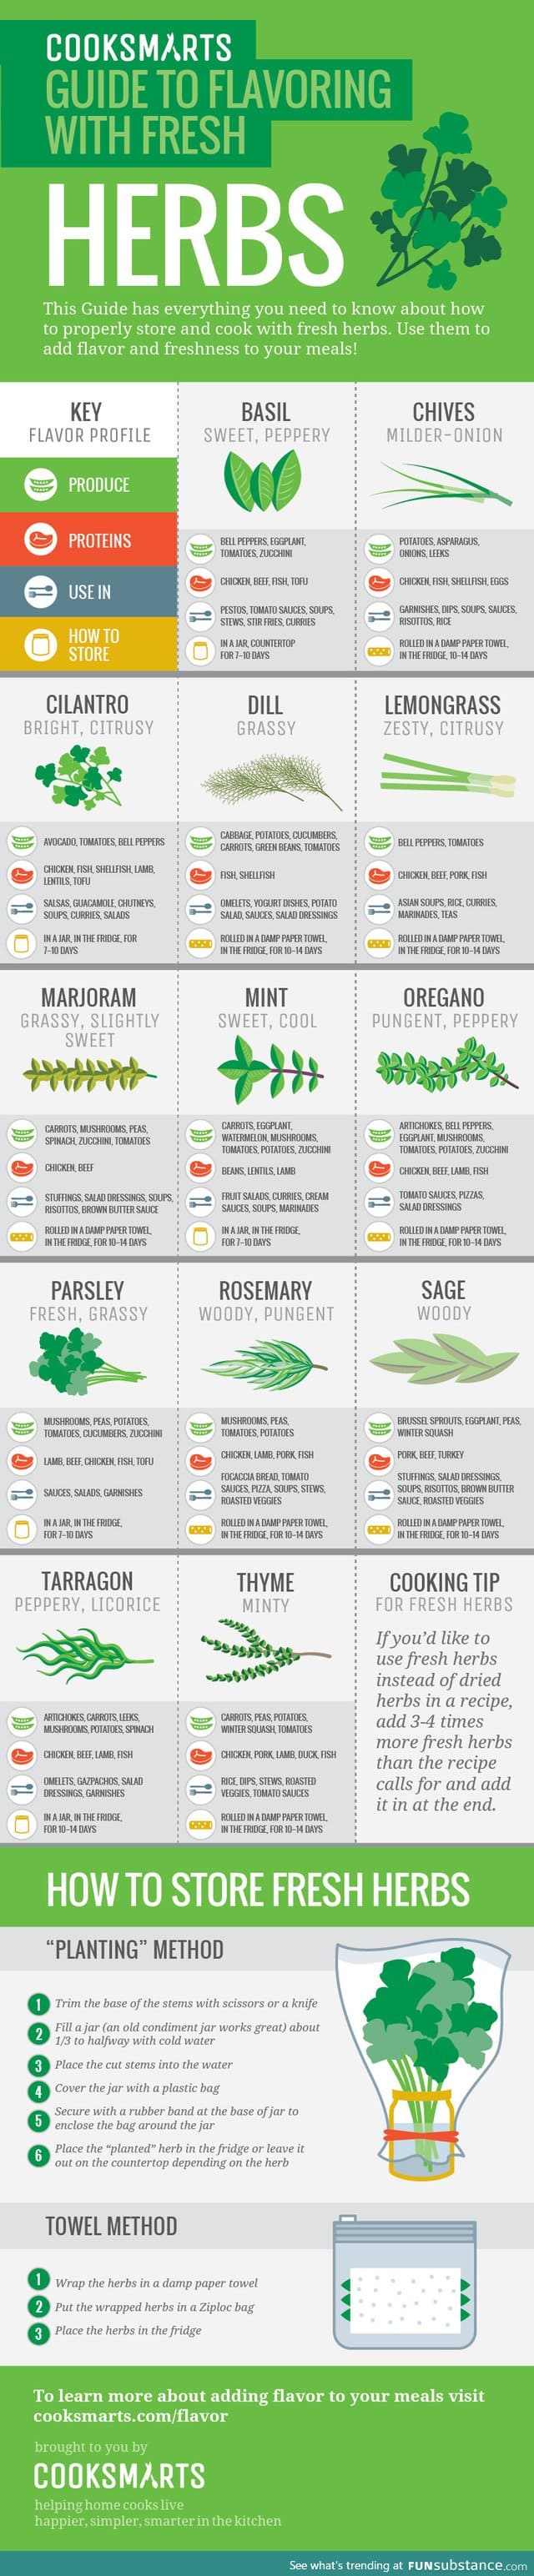 Guide to flavoring with fresh herbs